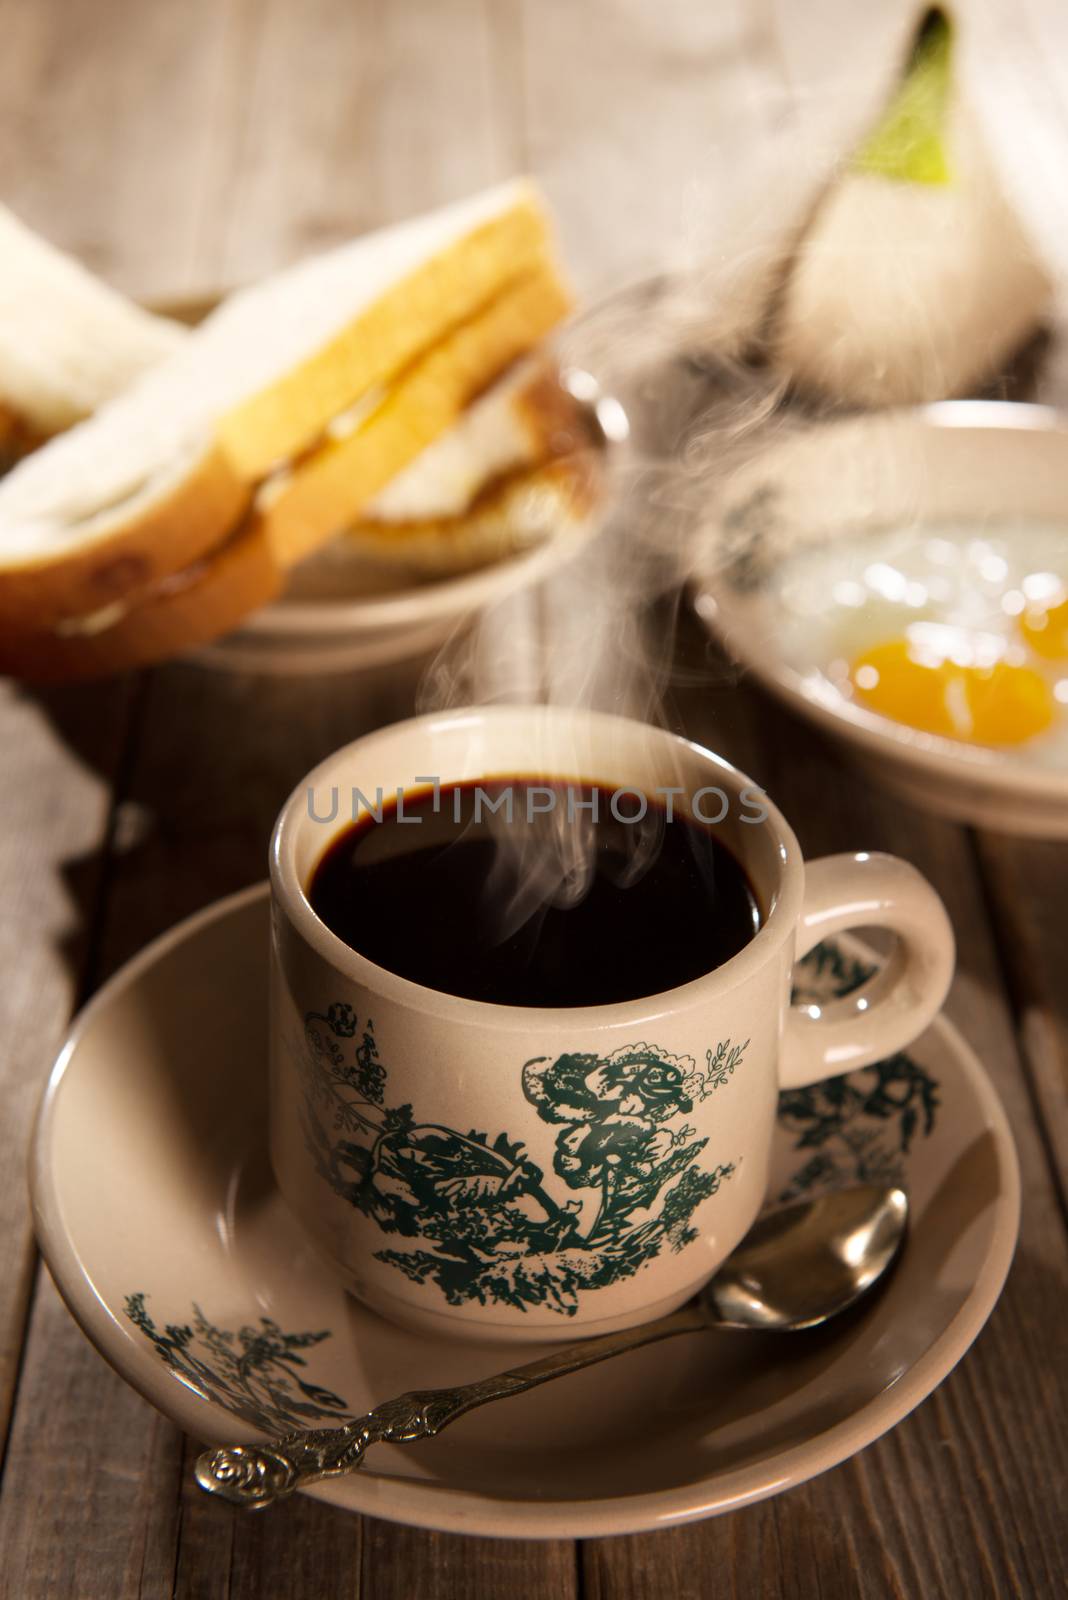 Traditional kopitiam style Malaysian coffee and breakfast with morning sunlight. Fractal on the cup is generic print. Soft focus dramatic ambient light over wood table.